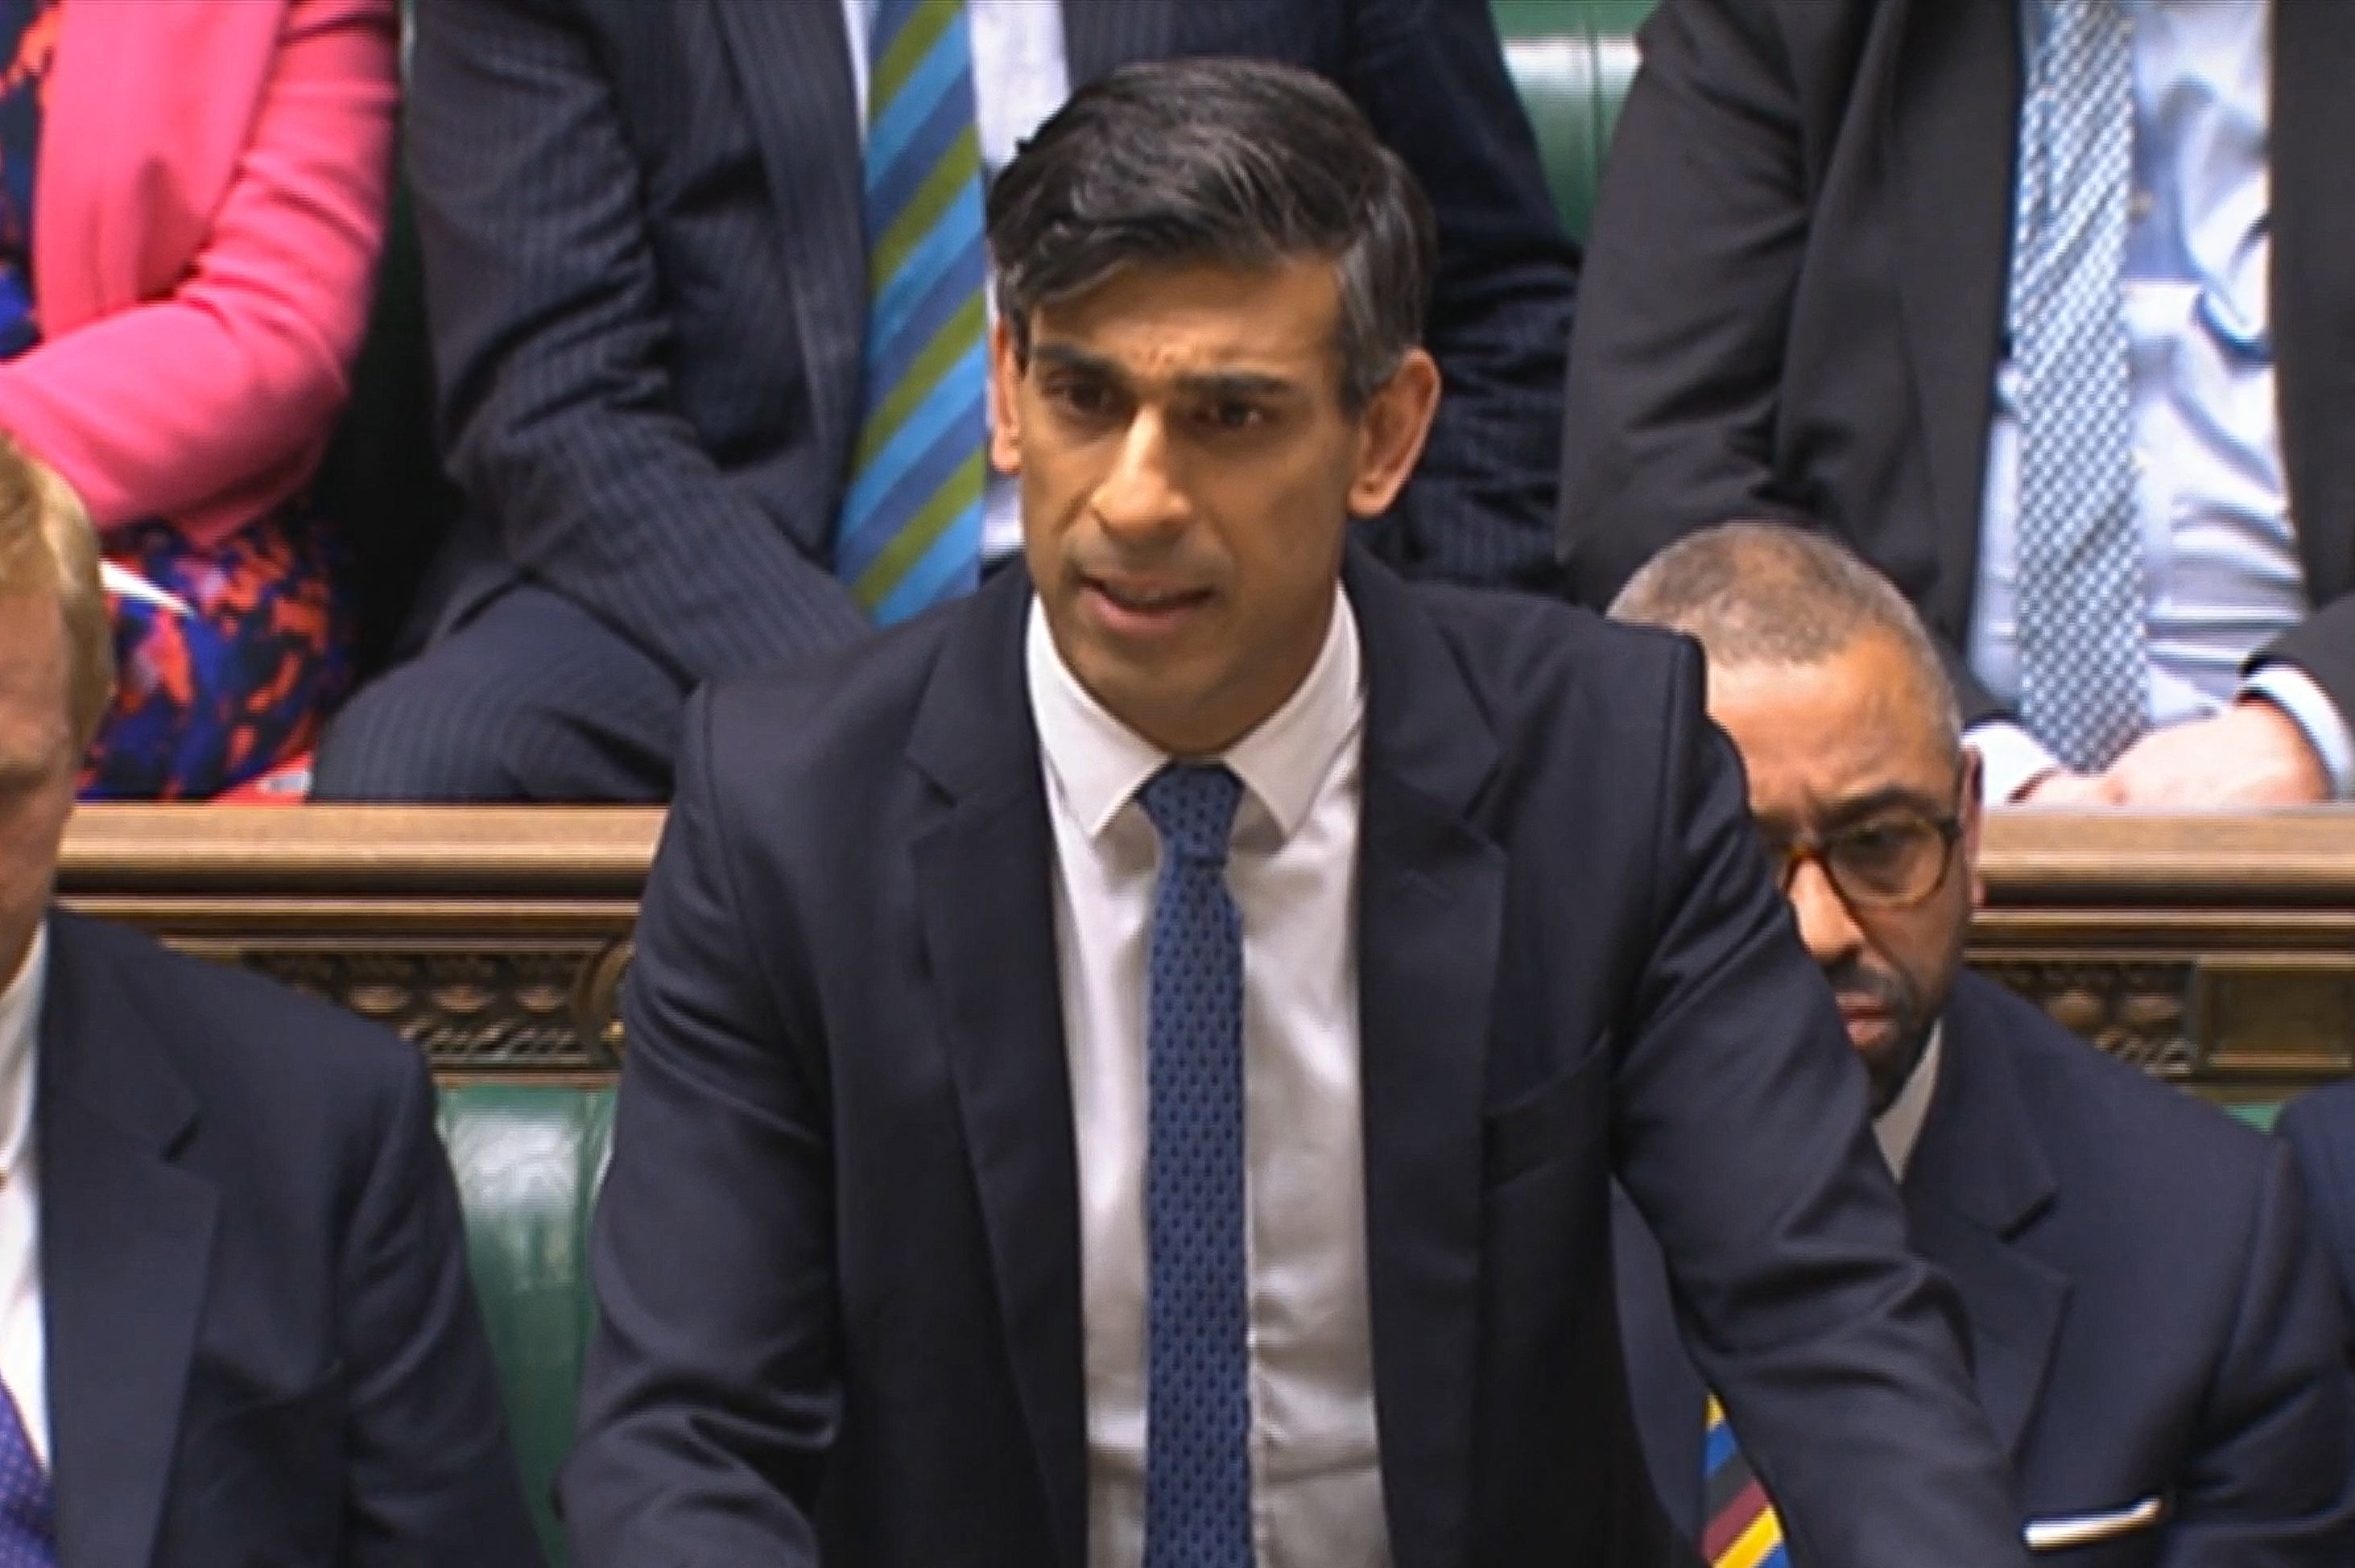 Rishi Sunak condemned the ‘reckless and dangerous’ escalation by Iran